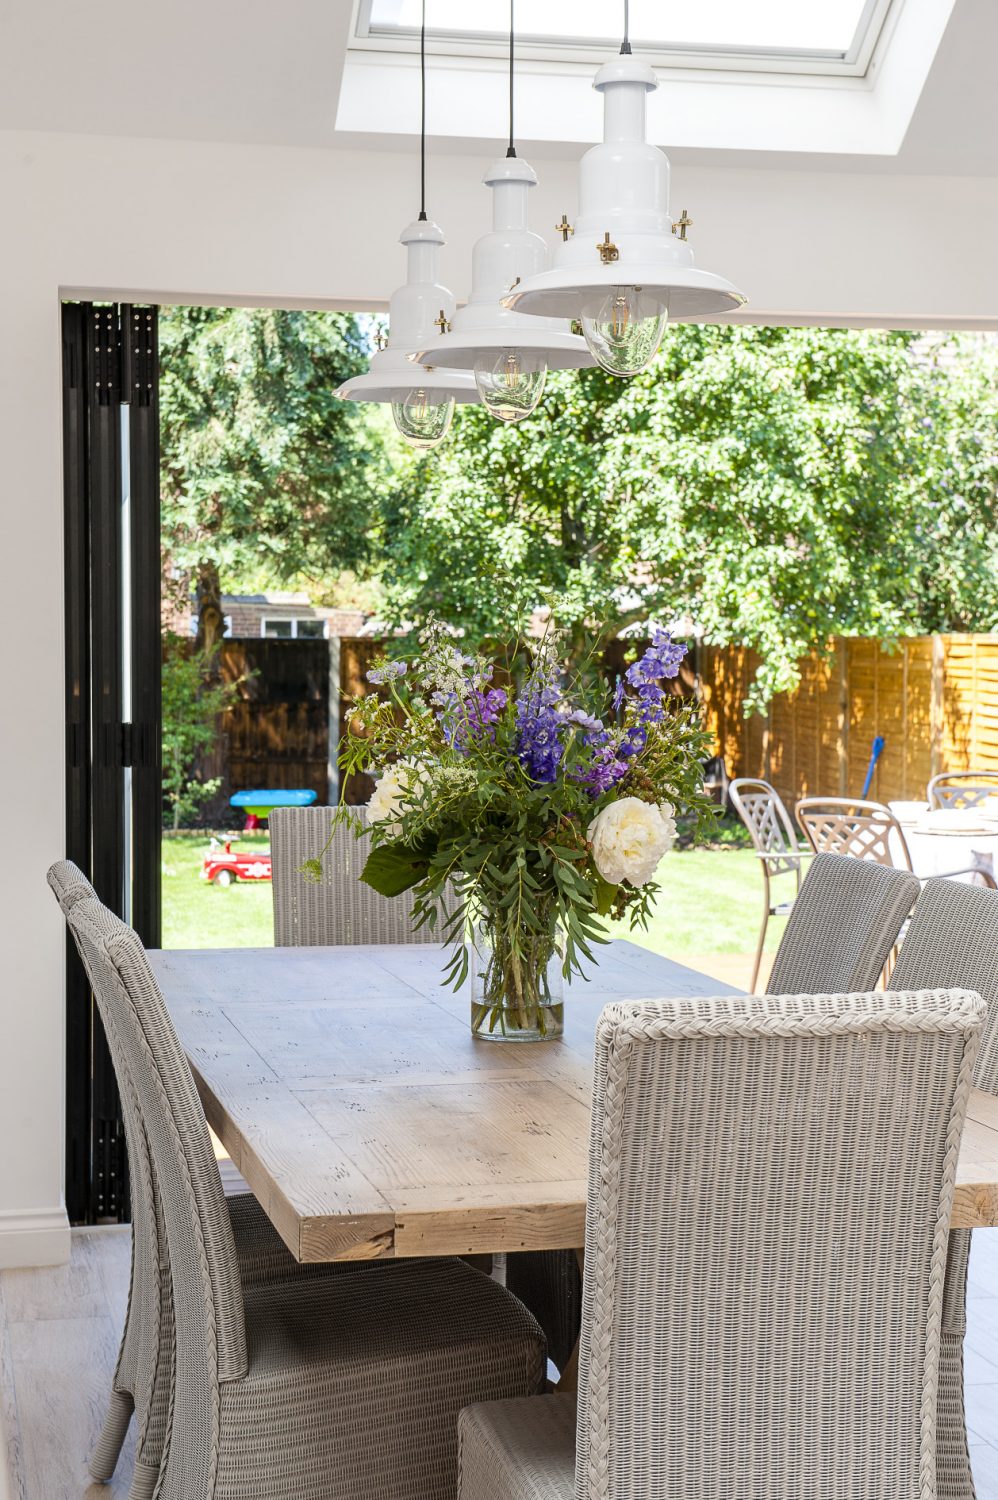 Bi-fold doors open the entire back of the house onto the garden